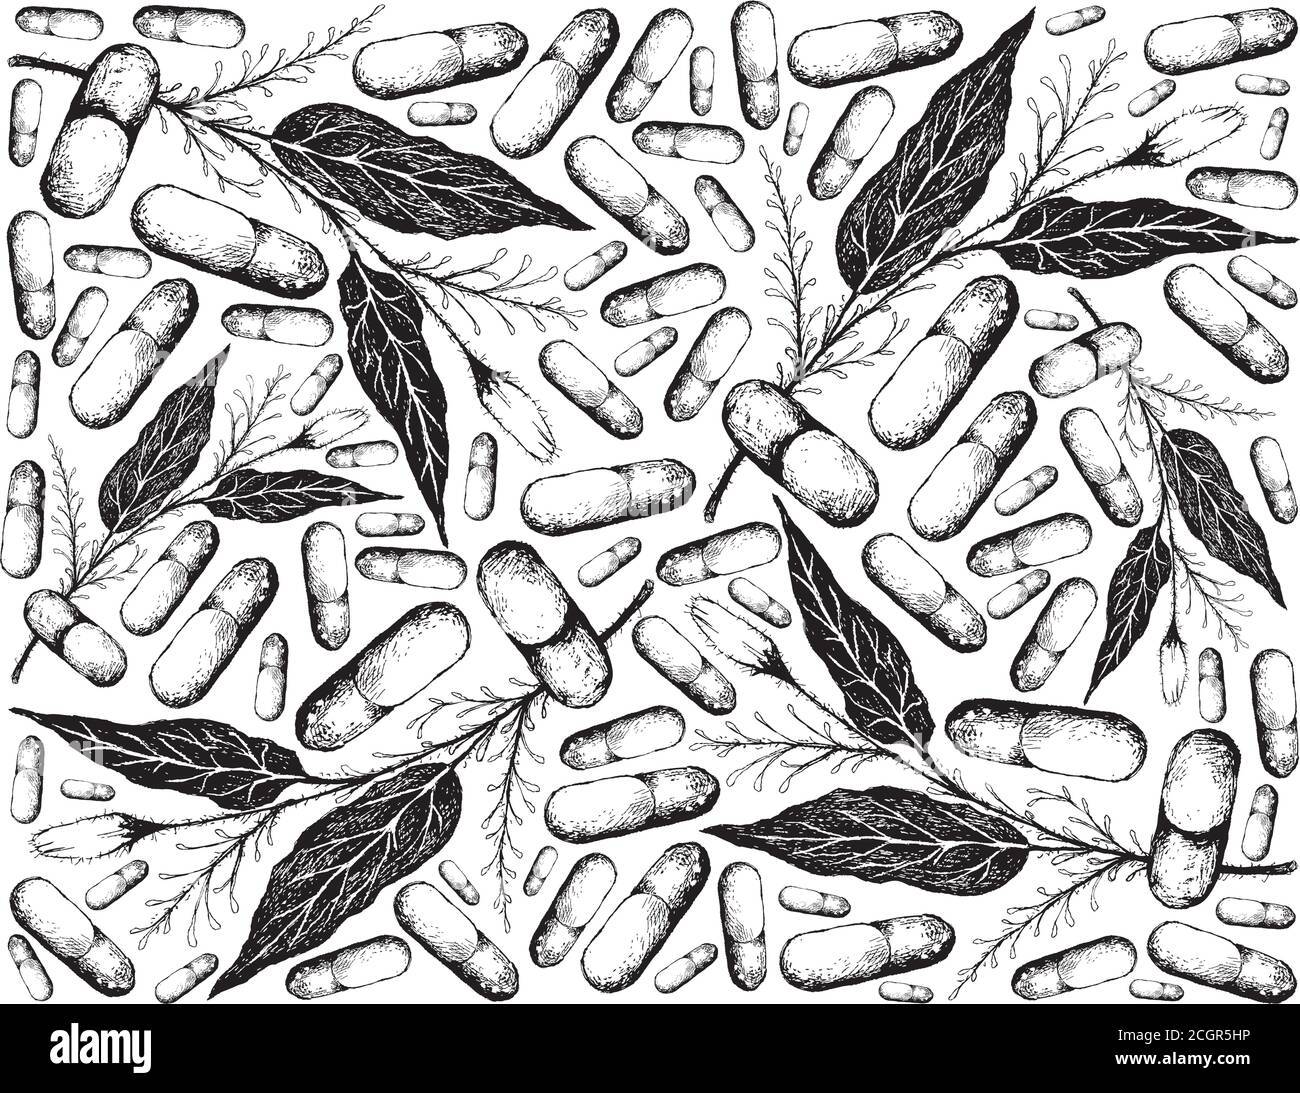 Vegetable and Herb, Hand Drawn Illustration Background of Kariyat or Andrographis Paniculata Plants with Pill. Ayurveda Herbal Medicine Used to Treat Stock Vector